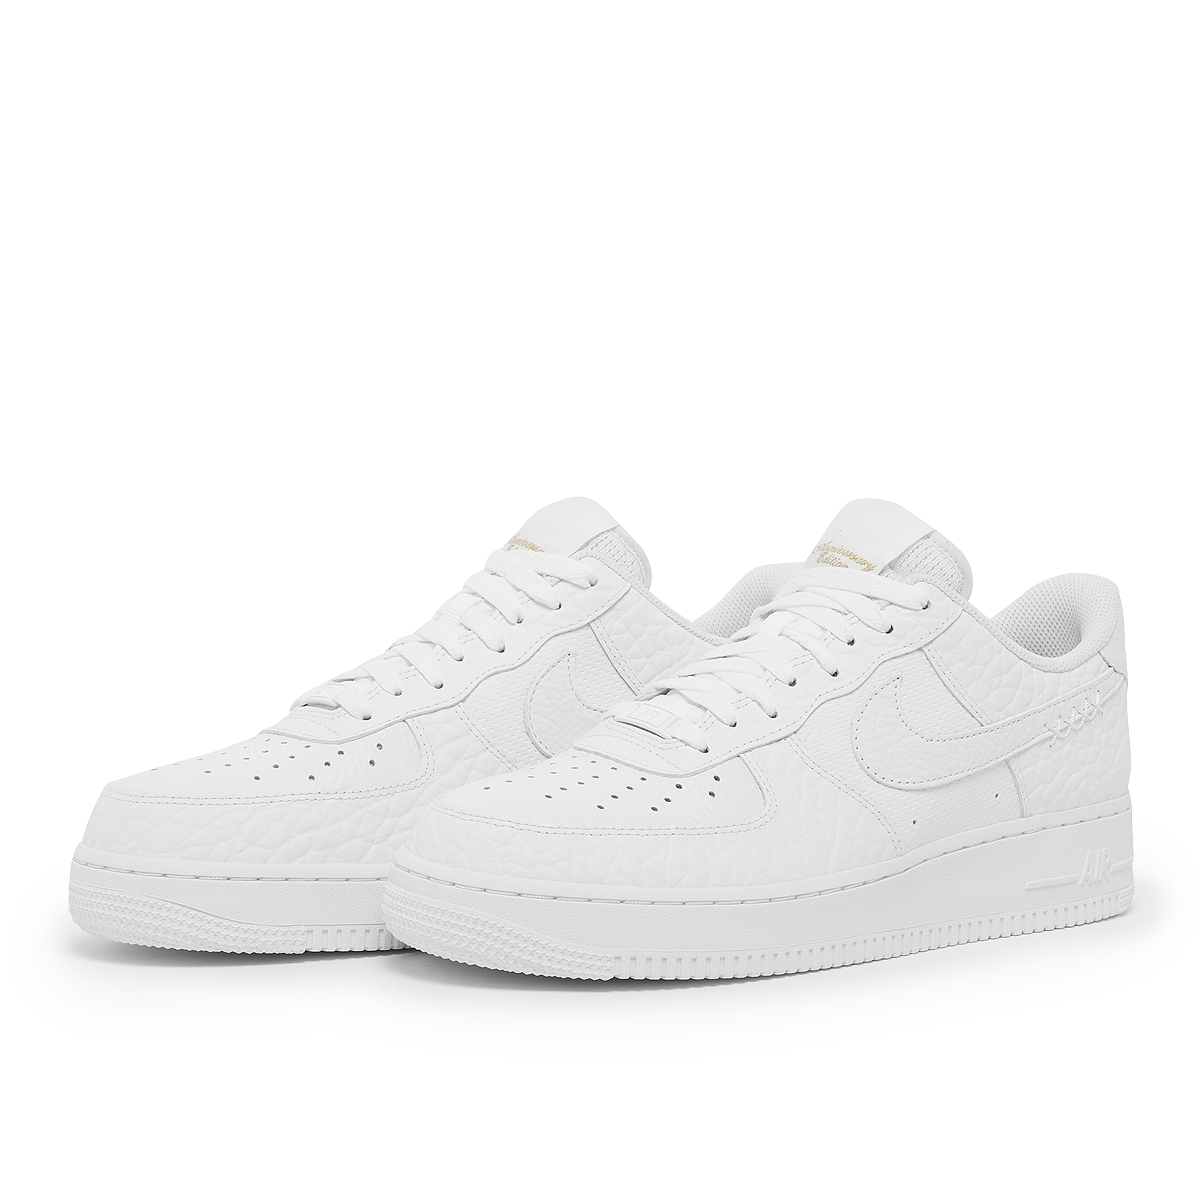 Air Force 1 '07 COTM "White Snakeskin" (Since 1982)